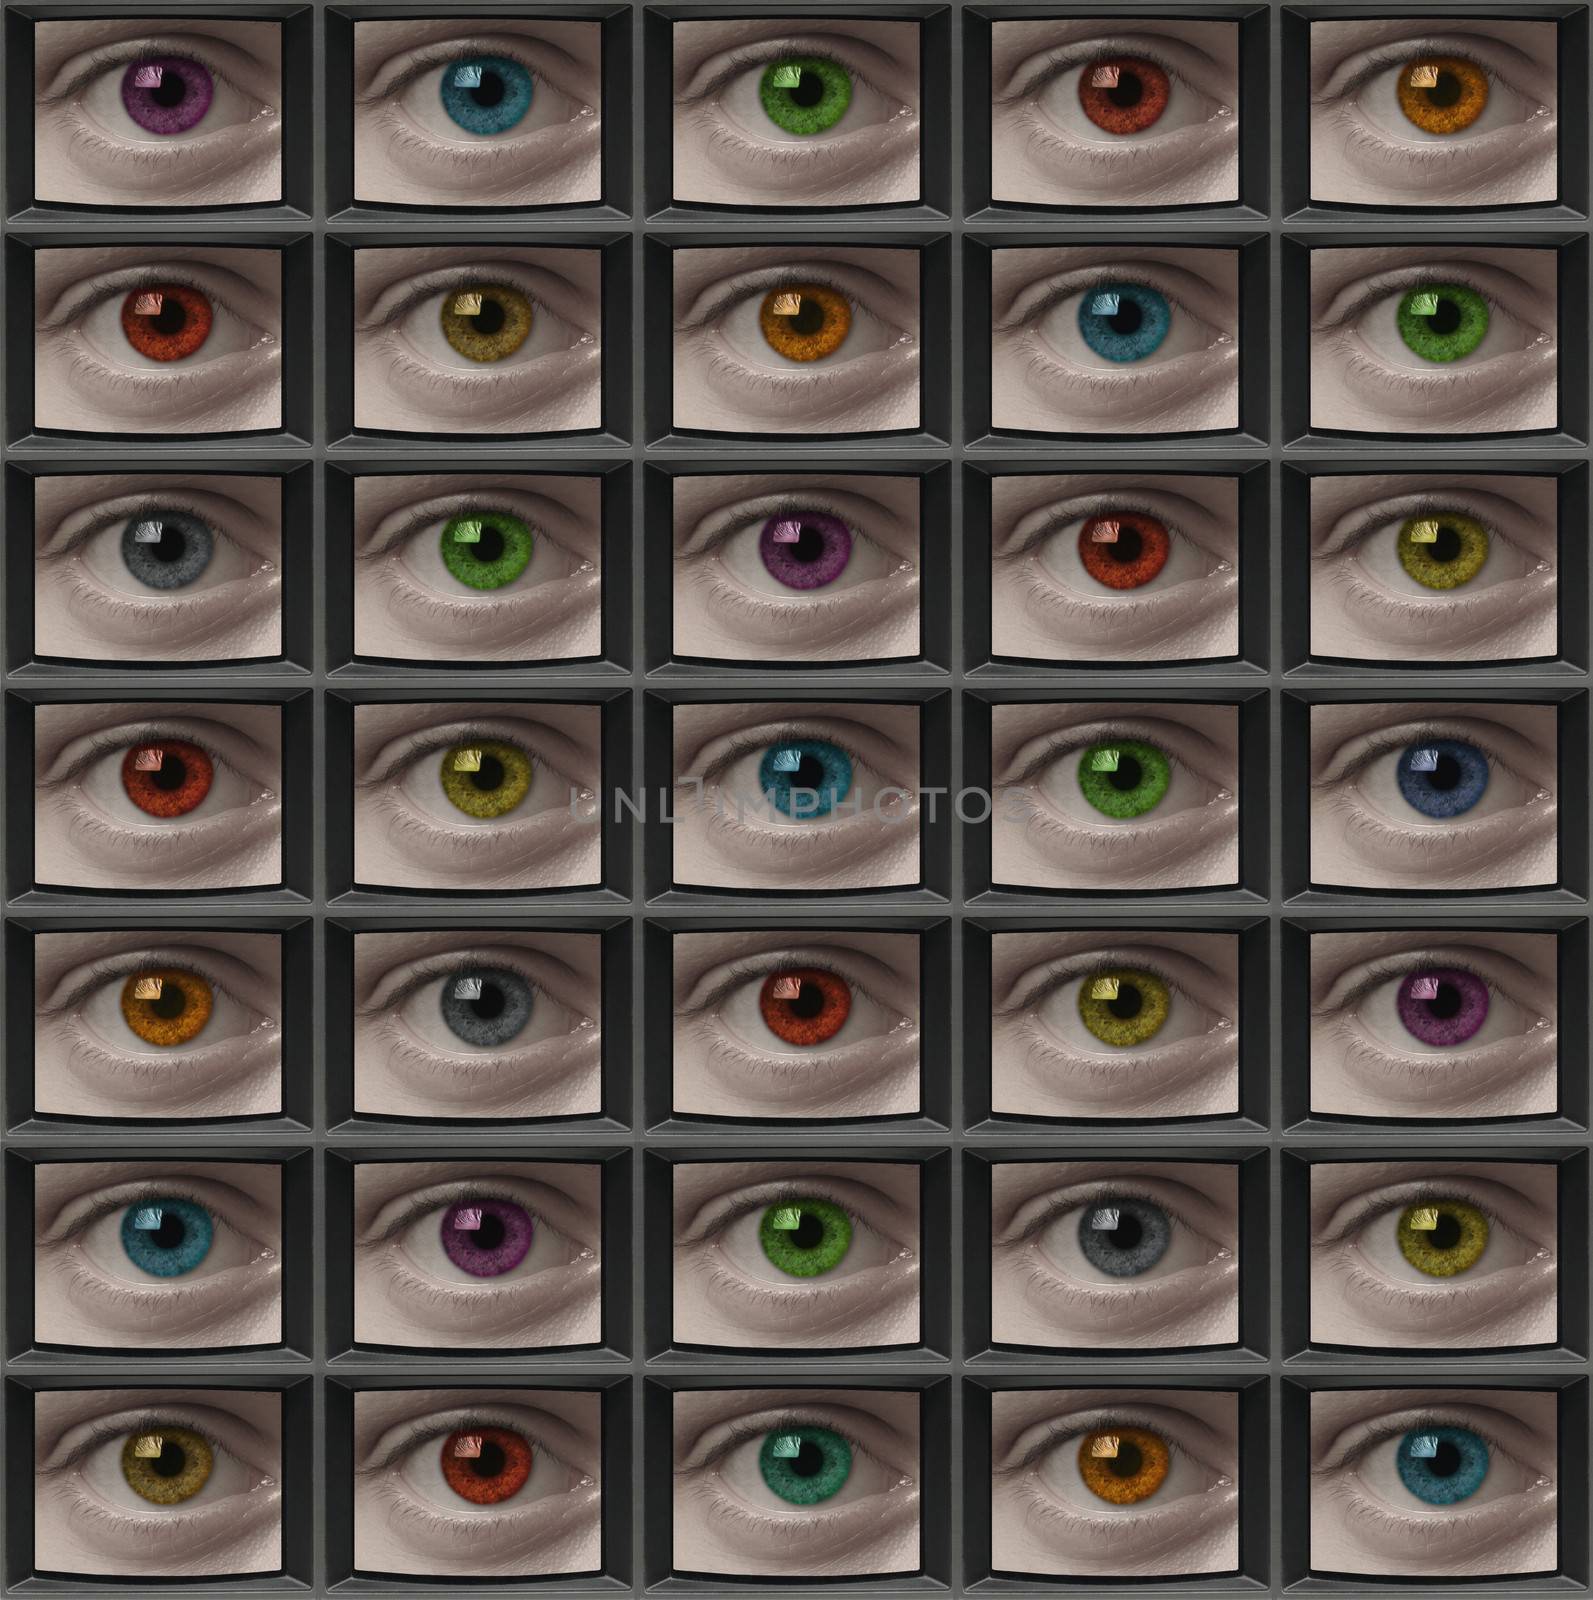 Video monitor screens of eyes with different color pupils by Balefire9